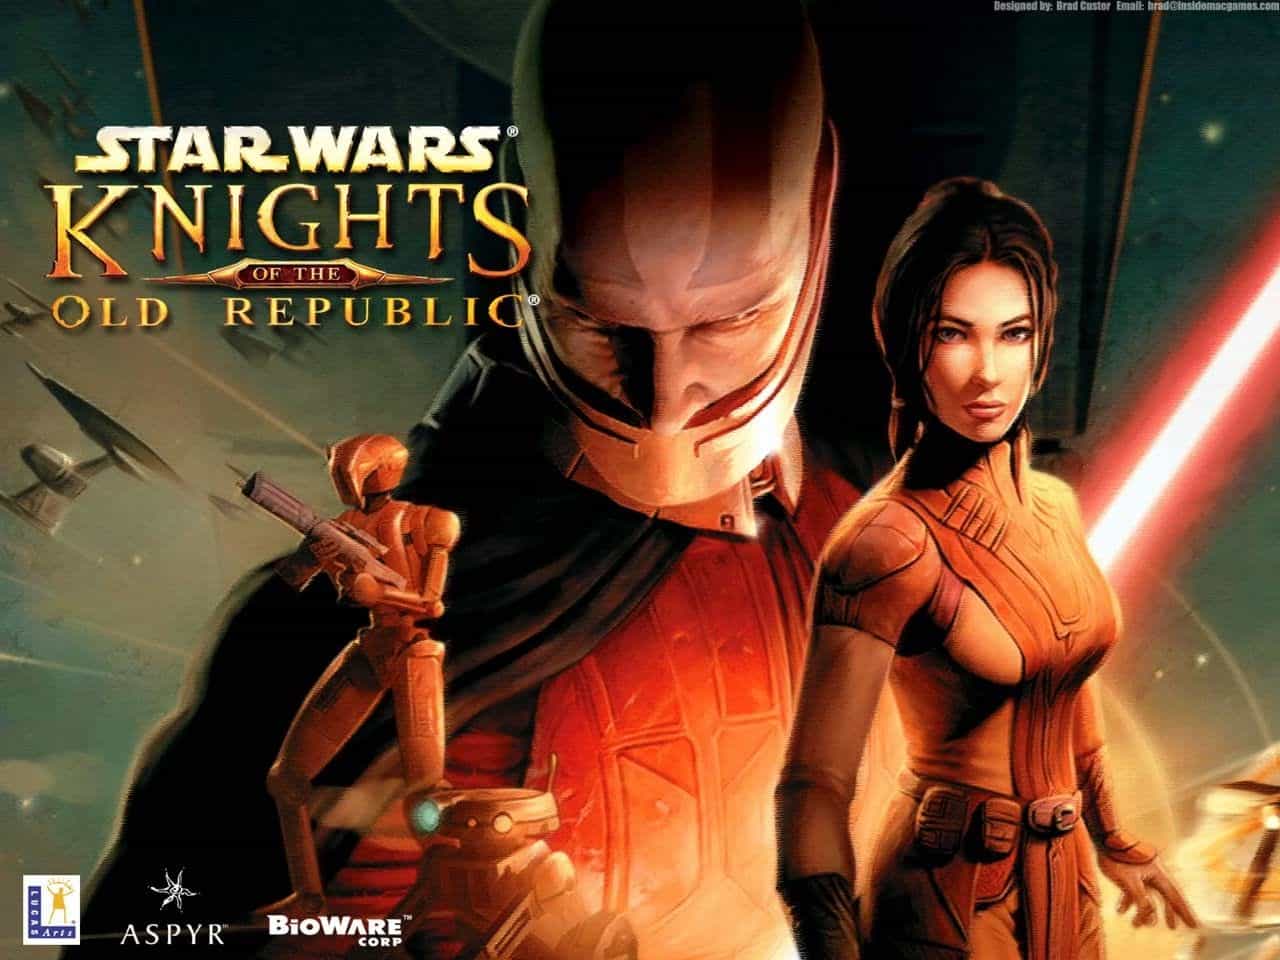 Star Wars Knights of the Old Republic I and II PC Bundle Pack